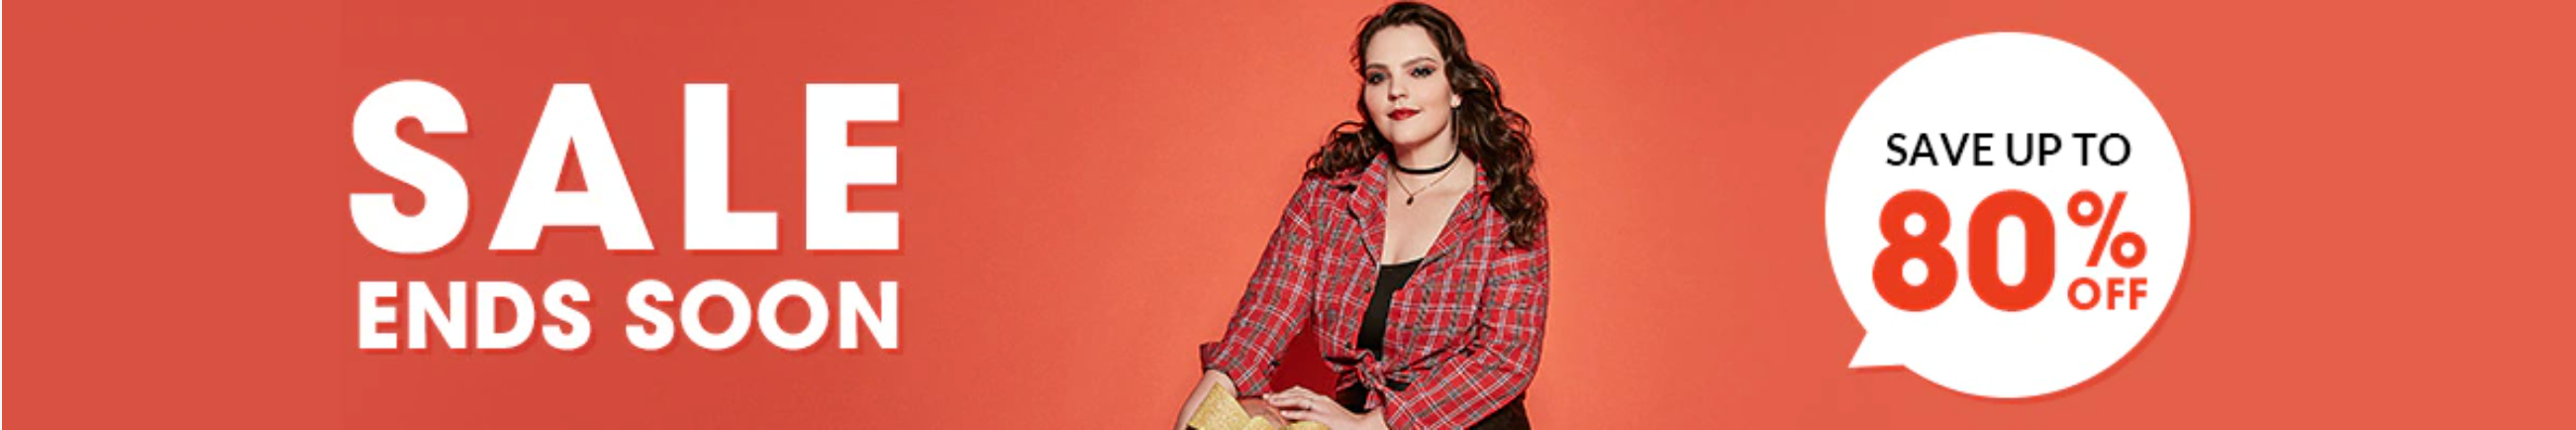 RoseGal: Sale up to 80% off plus size clothing